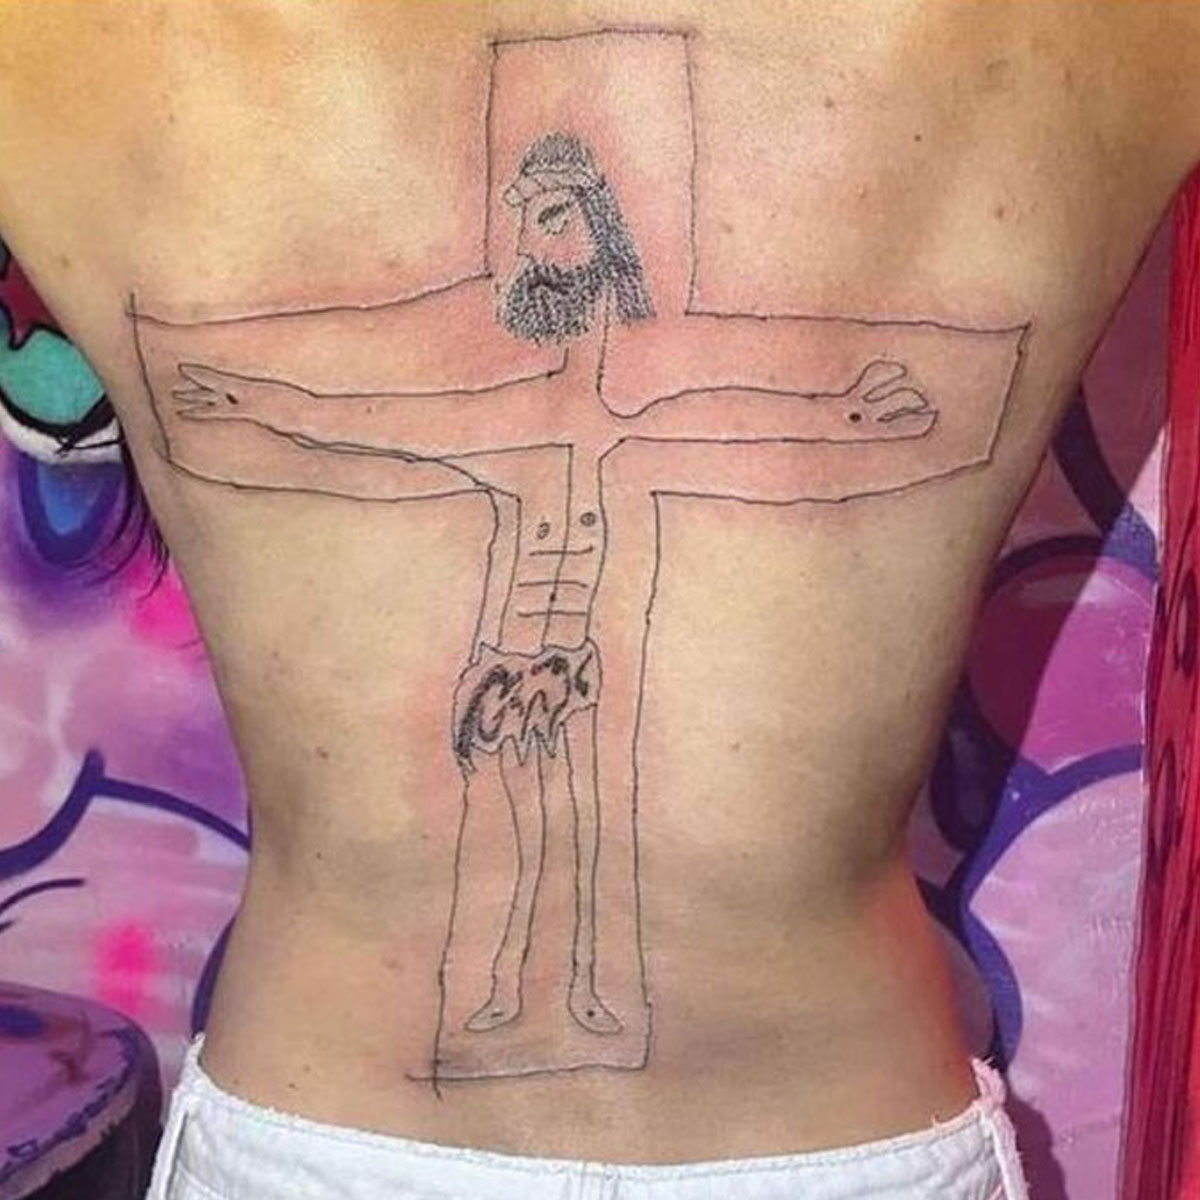 82 Times People Thought They Were Getting A Cool Tattoo, But Ended Up With A Permanent Mistake